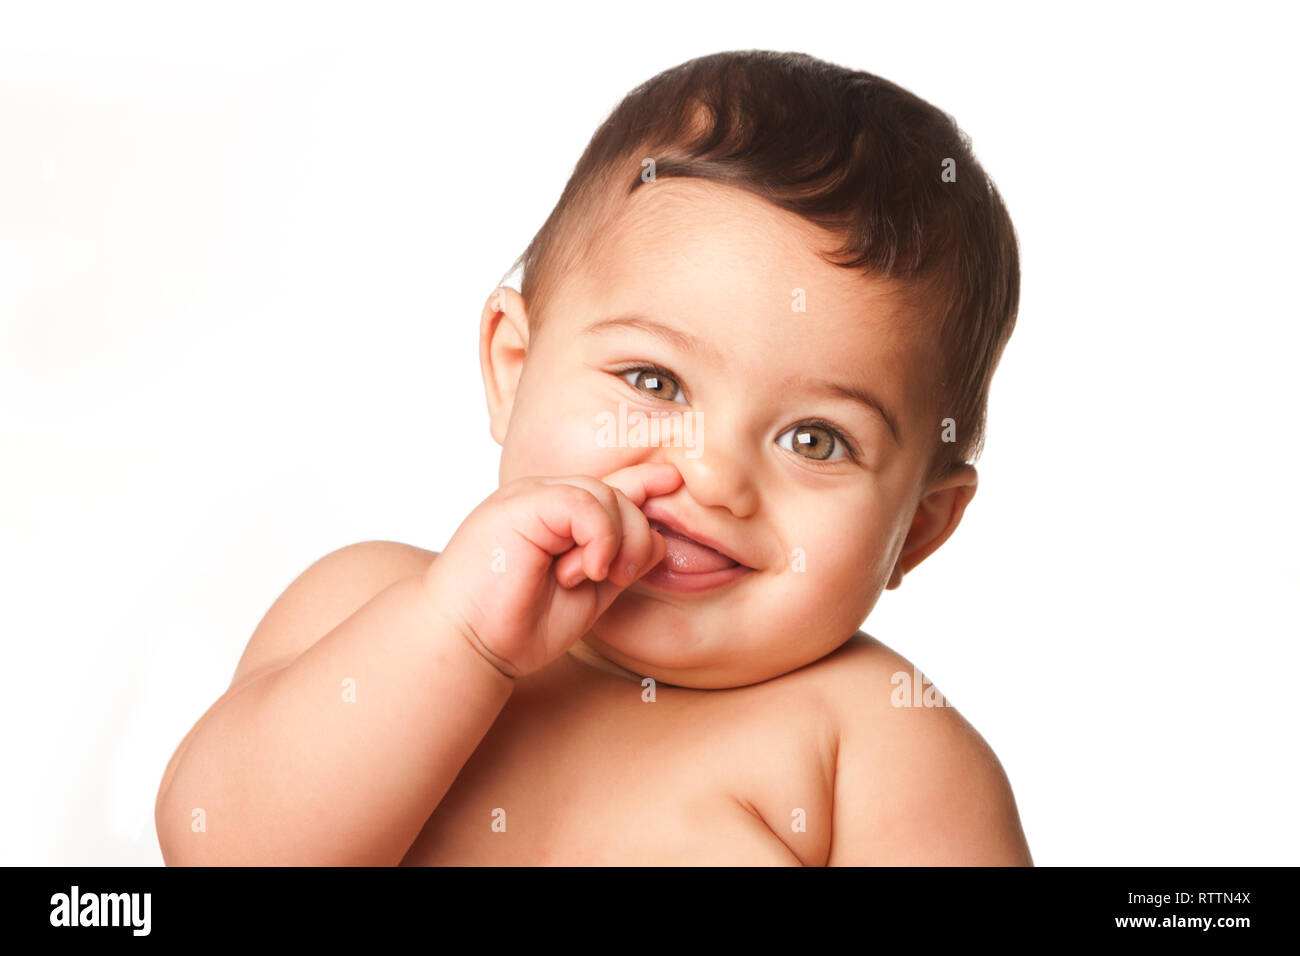 Cute happy innocent baby infant with big light green eyes picking nose, childhood concept, on white. Stock Photo